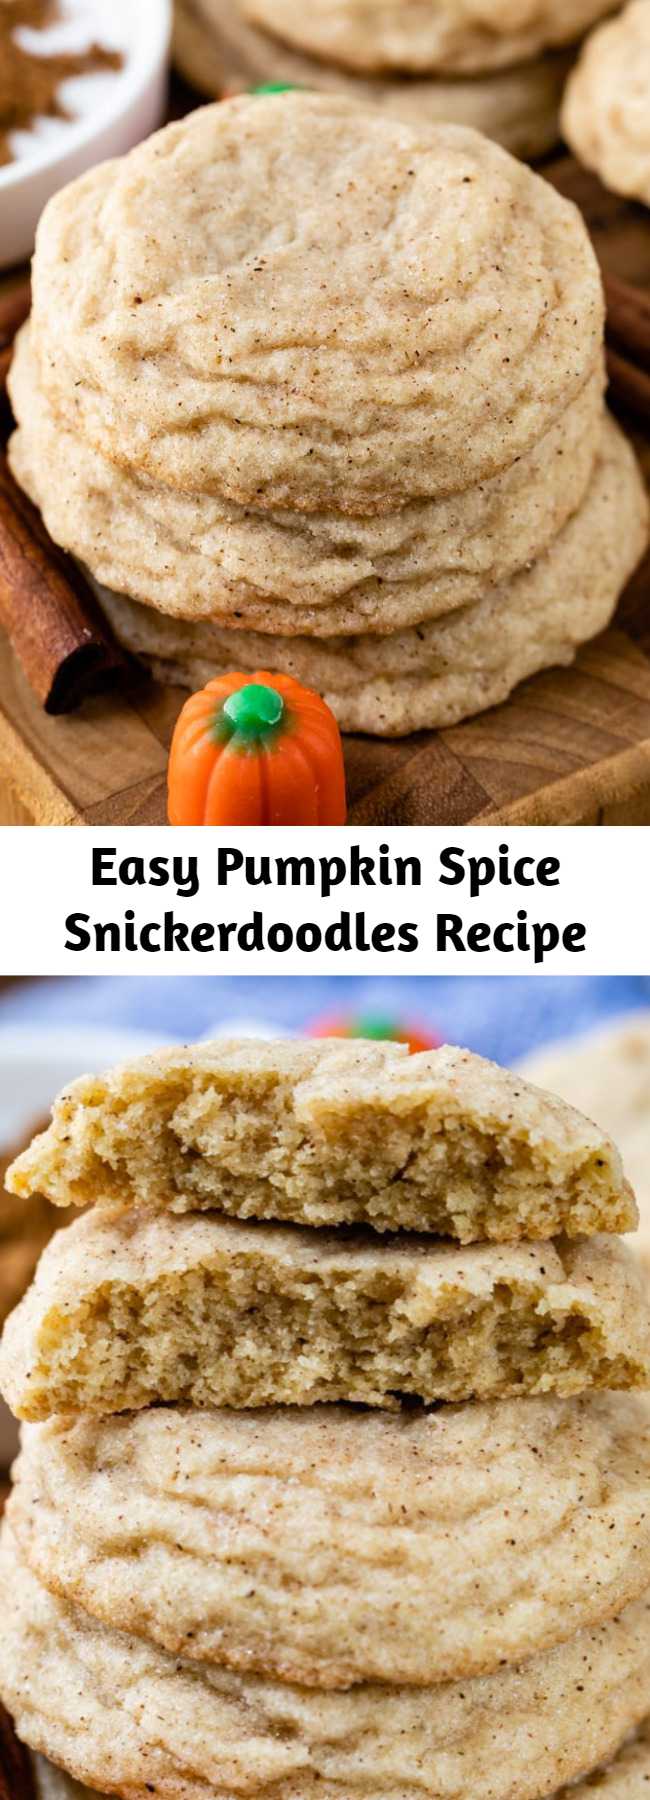 Easy Pumpkin Spice Snickerdoodles Recipe - We love this easy cookie recipe! Make snickerdoodles with pumpkin pie spice! Pumpkin Spice Snickerdoodles are the best fall cookie recipe!